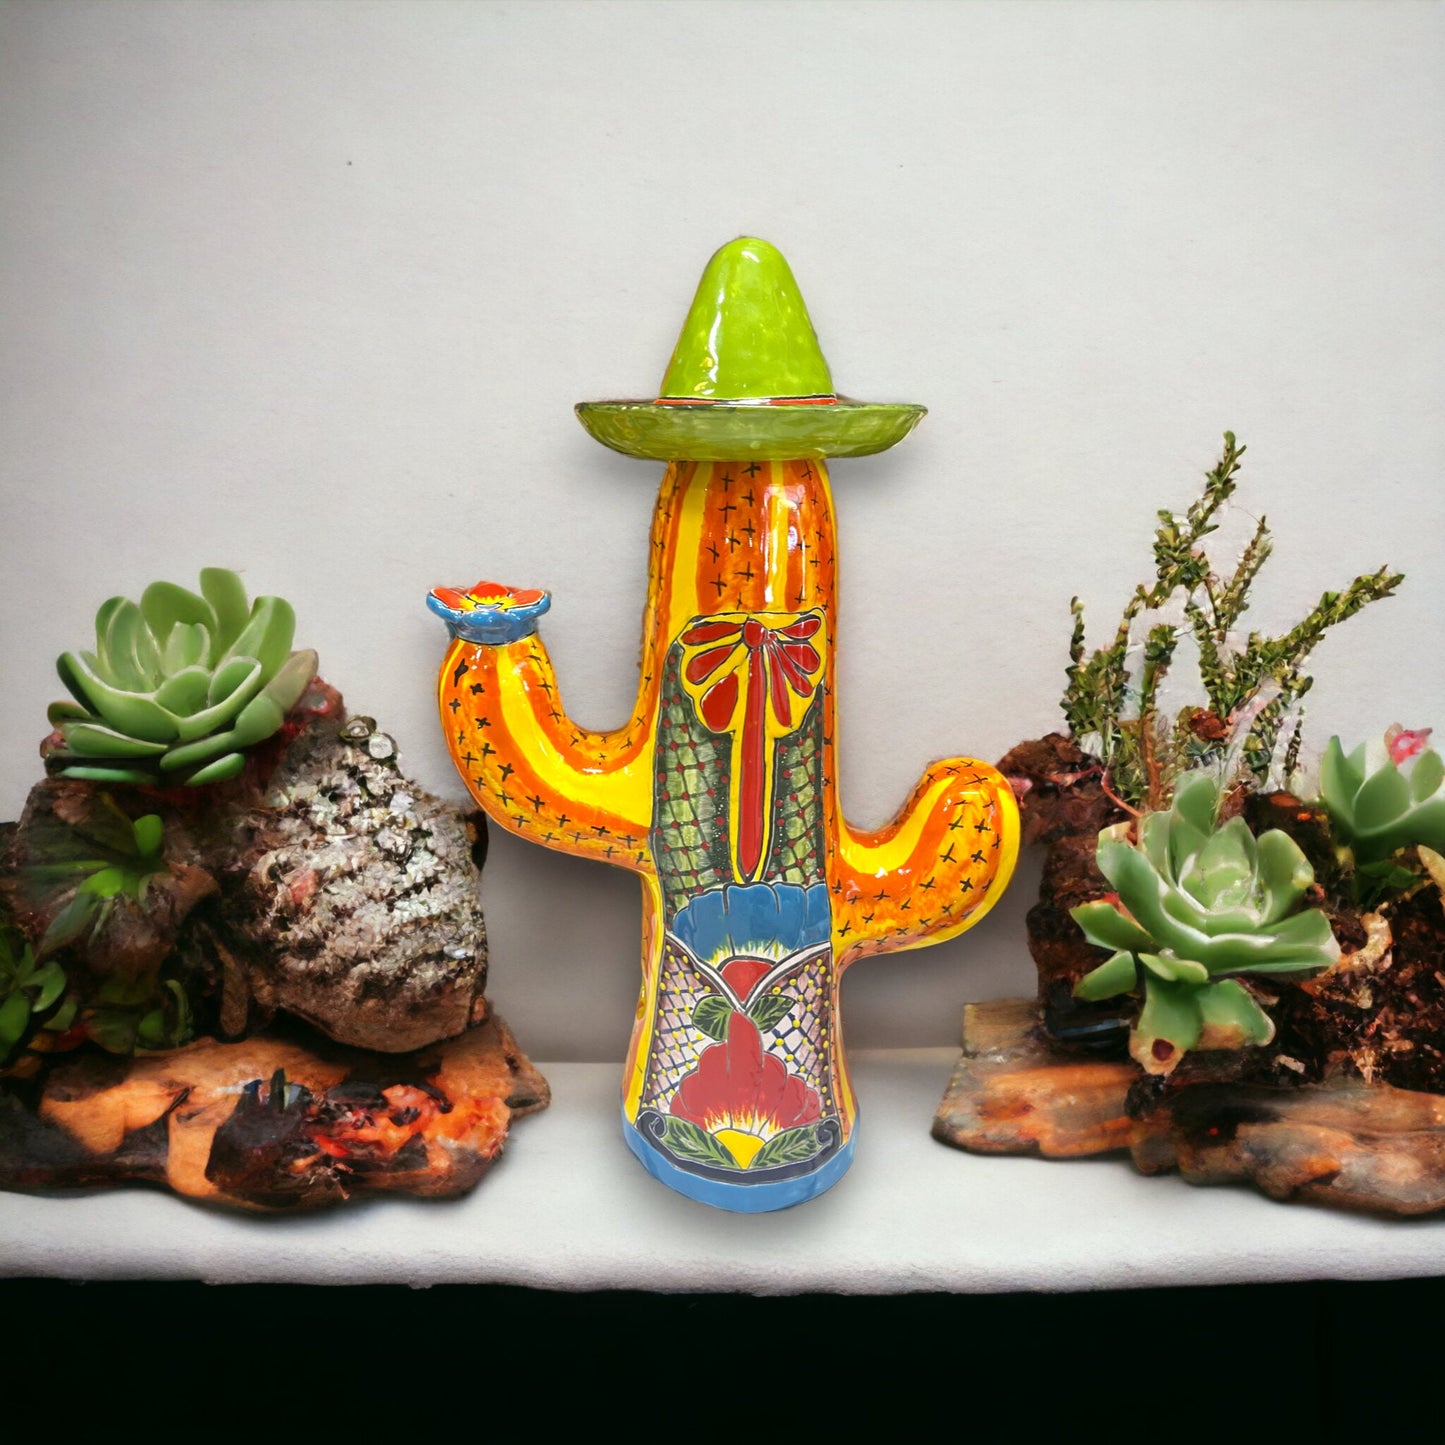 Handcrafted Talavera Cactus with Sombrero Statue | Medium-Sized Colorful Mexican Cultural Art